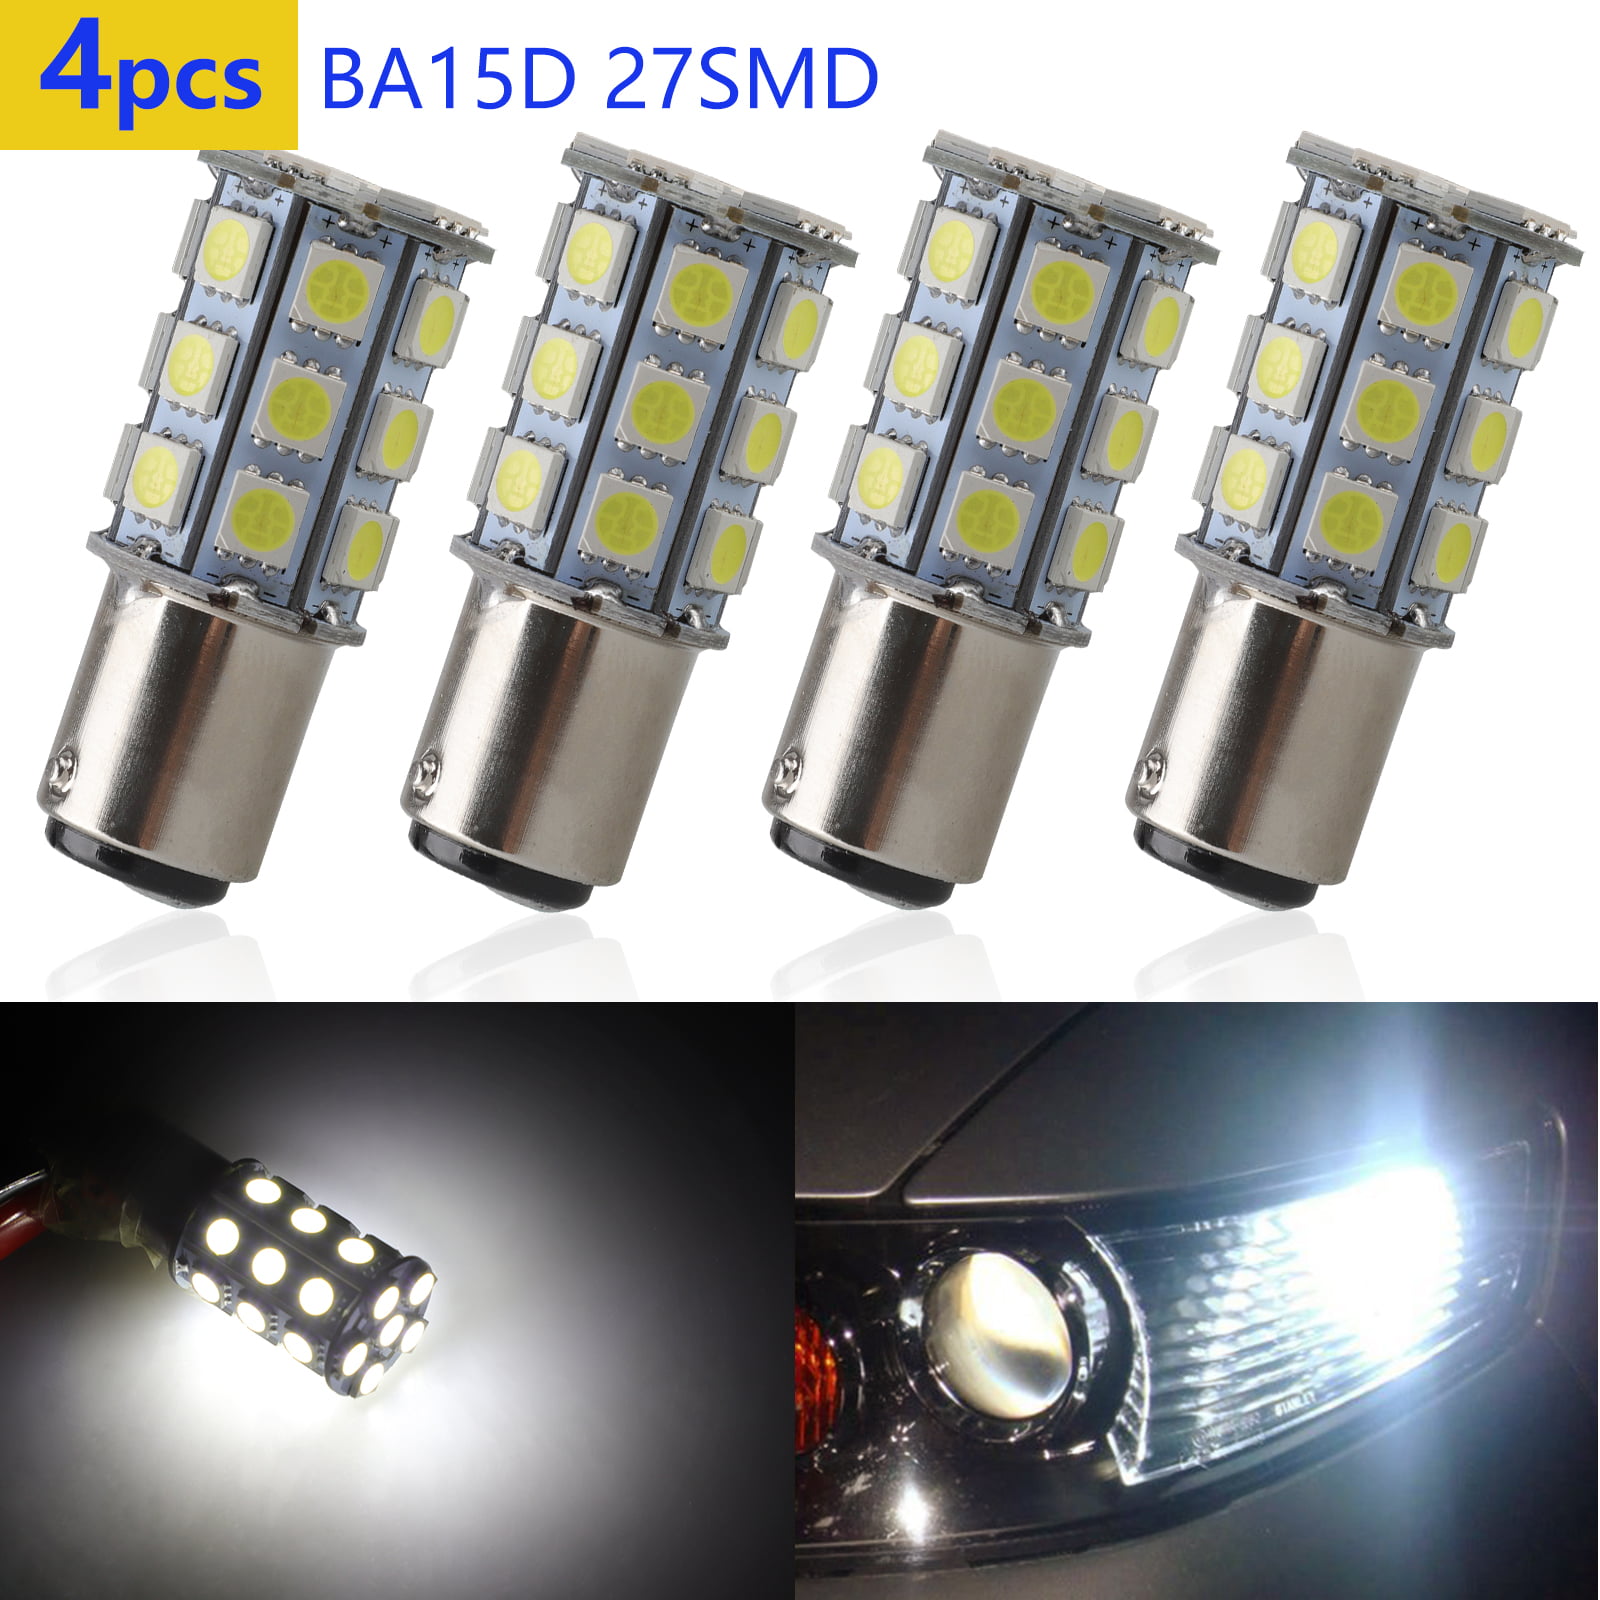 White 6000K JIAYUAN 4 x BA15D 24 SMD 1076 1142 68 90 1004 1130 1158 1176 1178 Motorcycle LED Bulbs Replacement for Marine Boat RV Voltage DC12V 